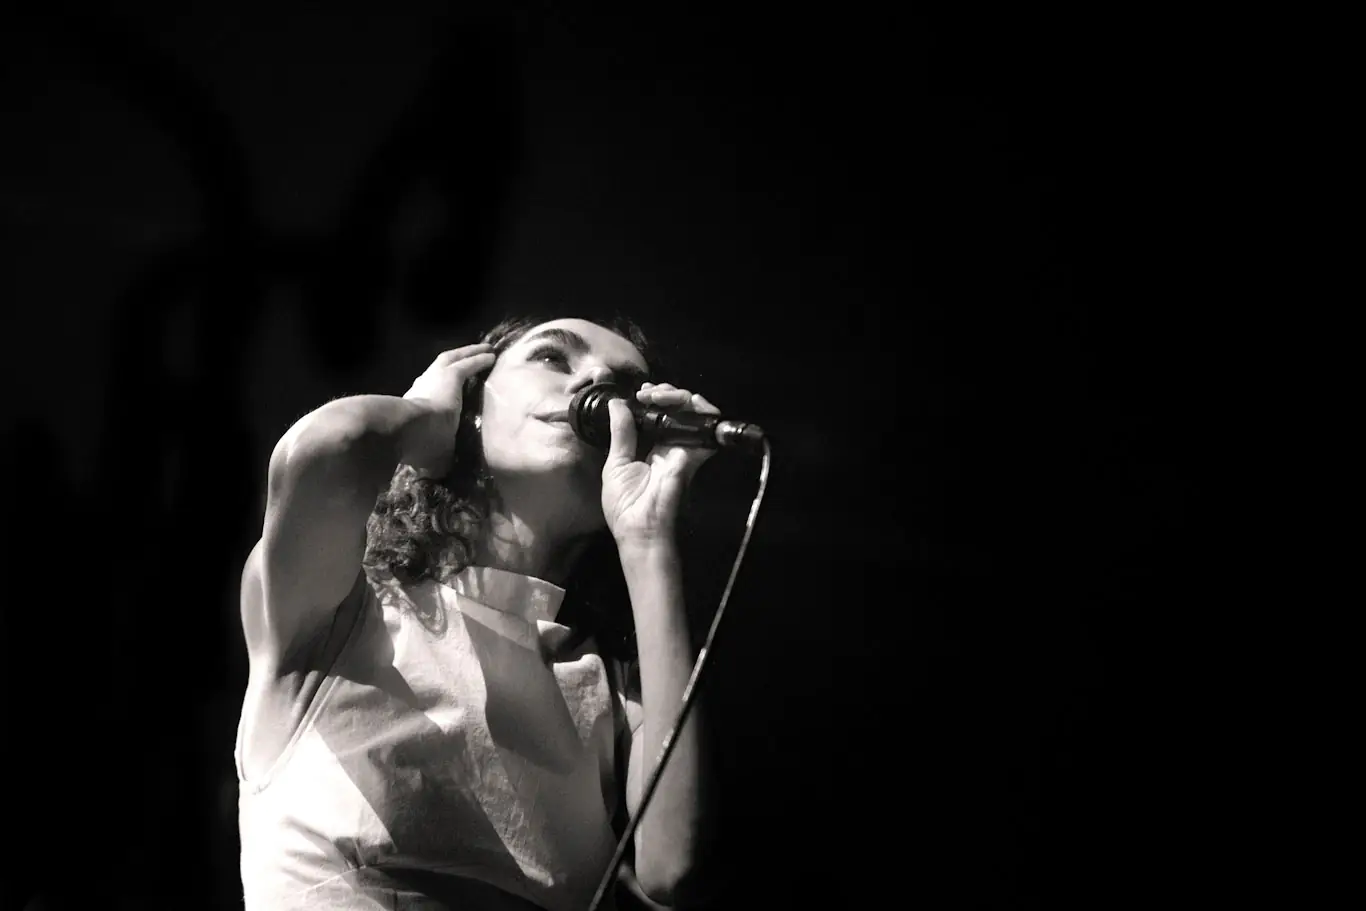 LIVE REVIEW: PJ Harvey at Camden Roundhouse